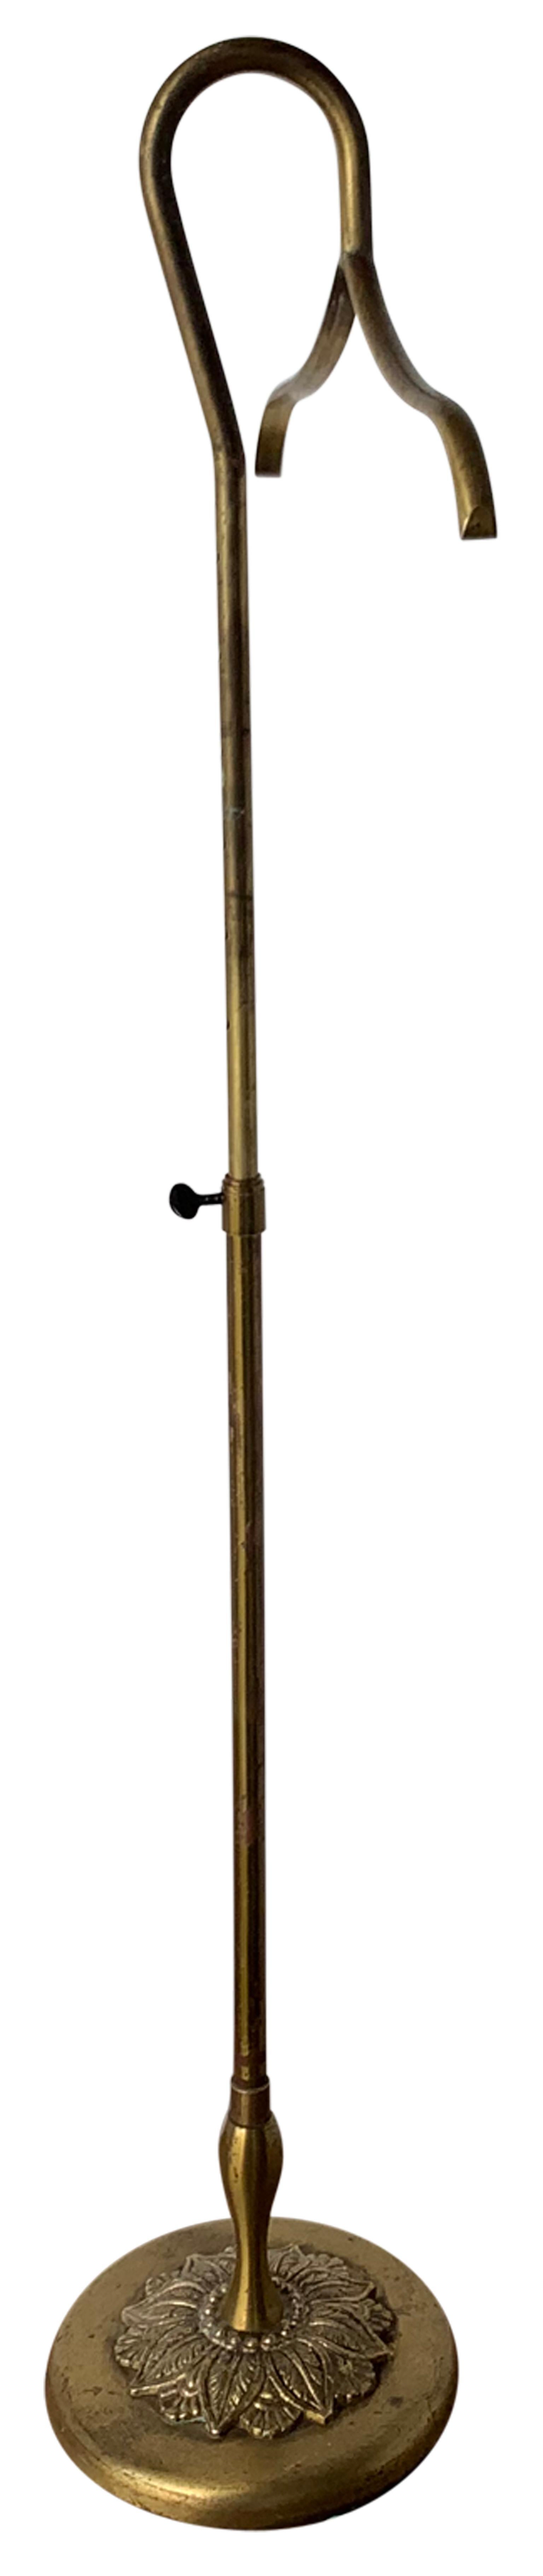 Art Deco Early French Height Adjustable Brass Coat or Shirt Holder Stand